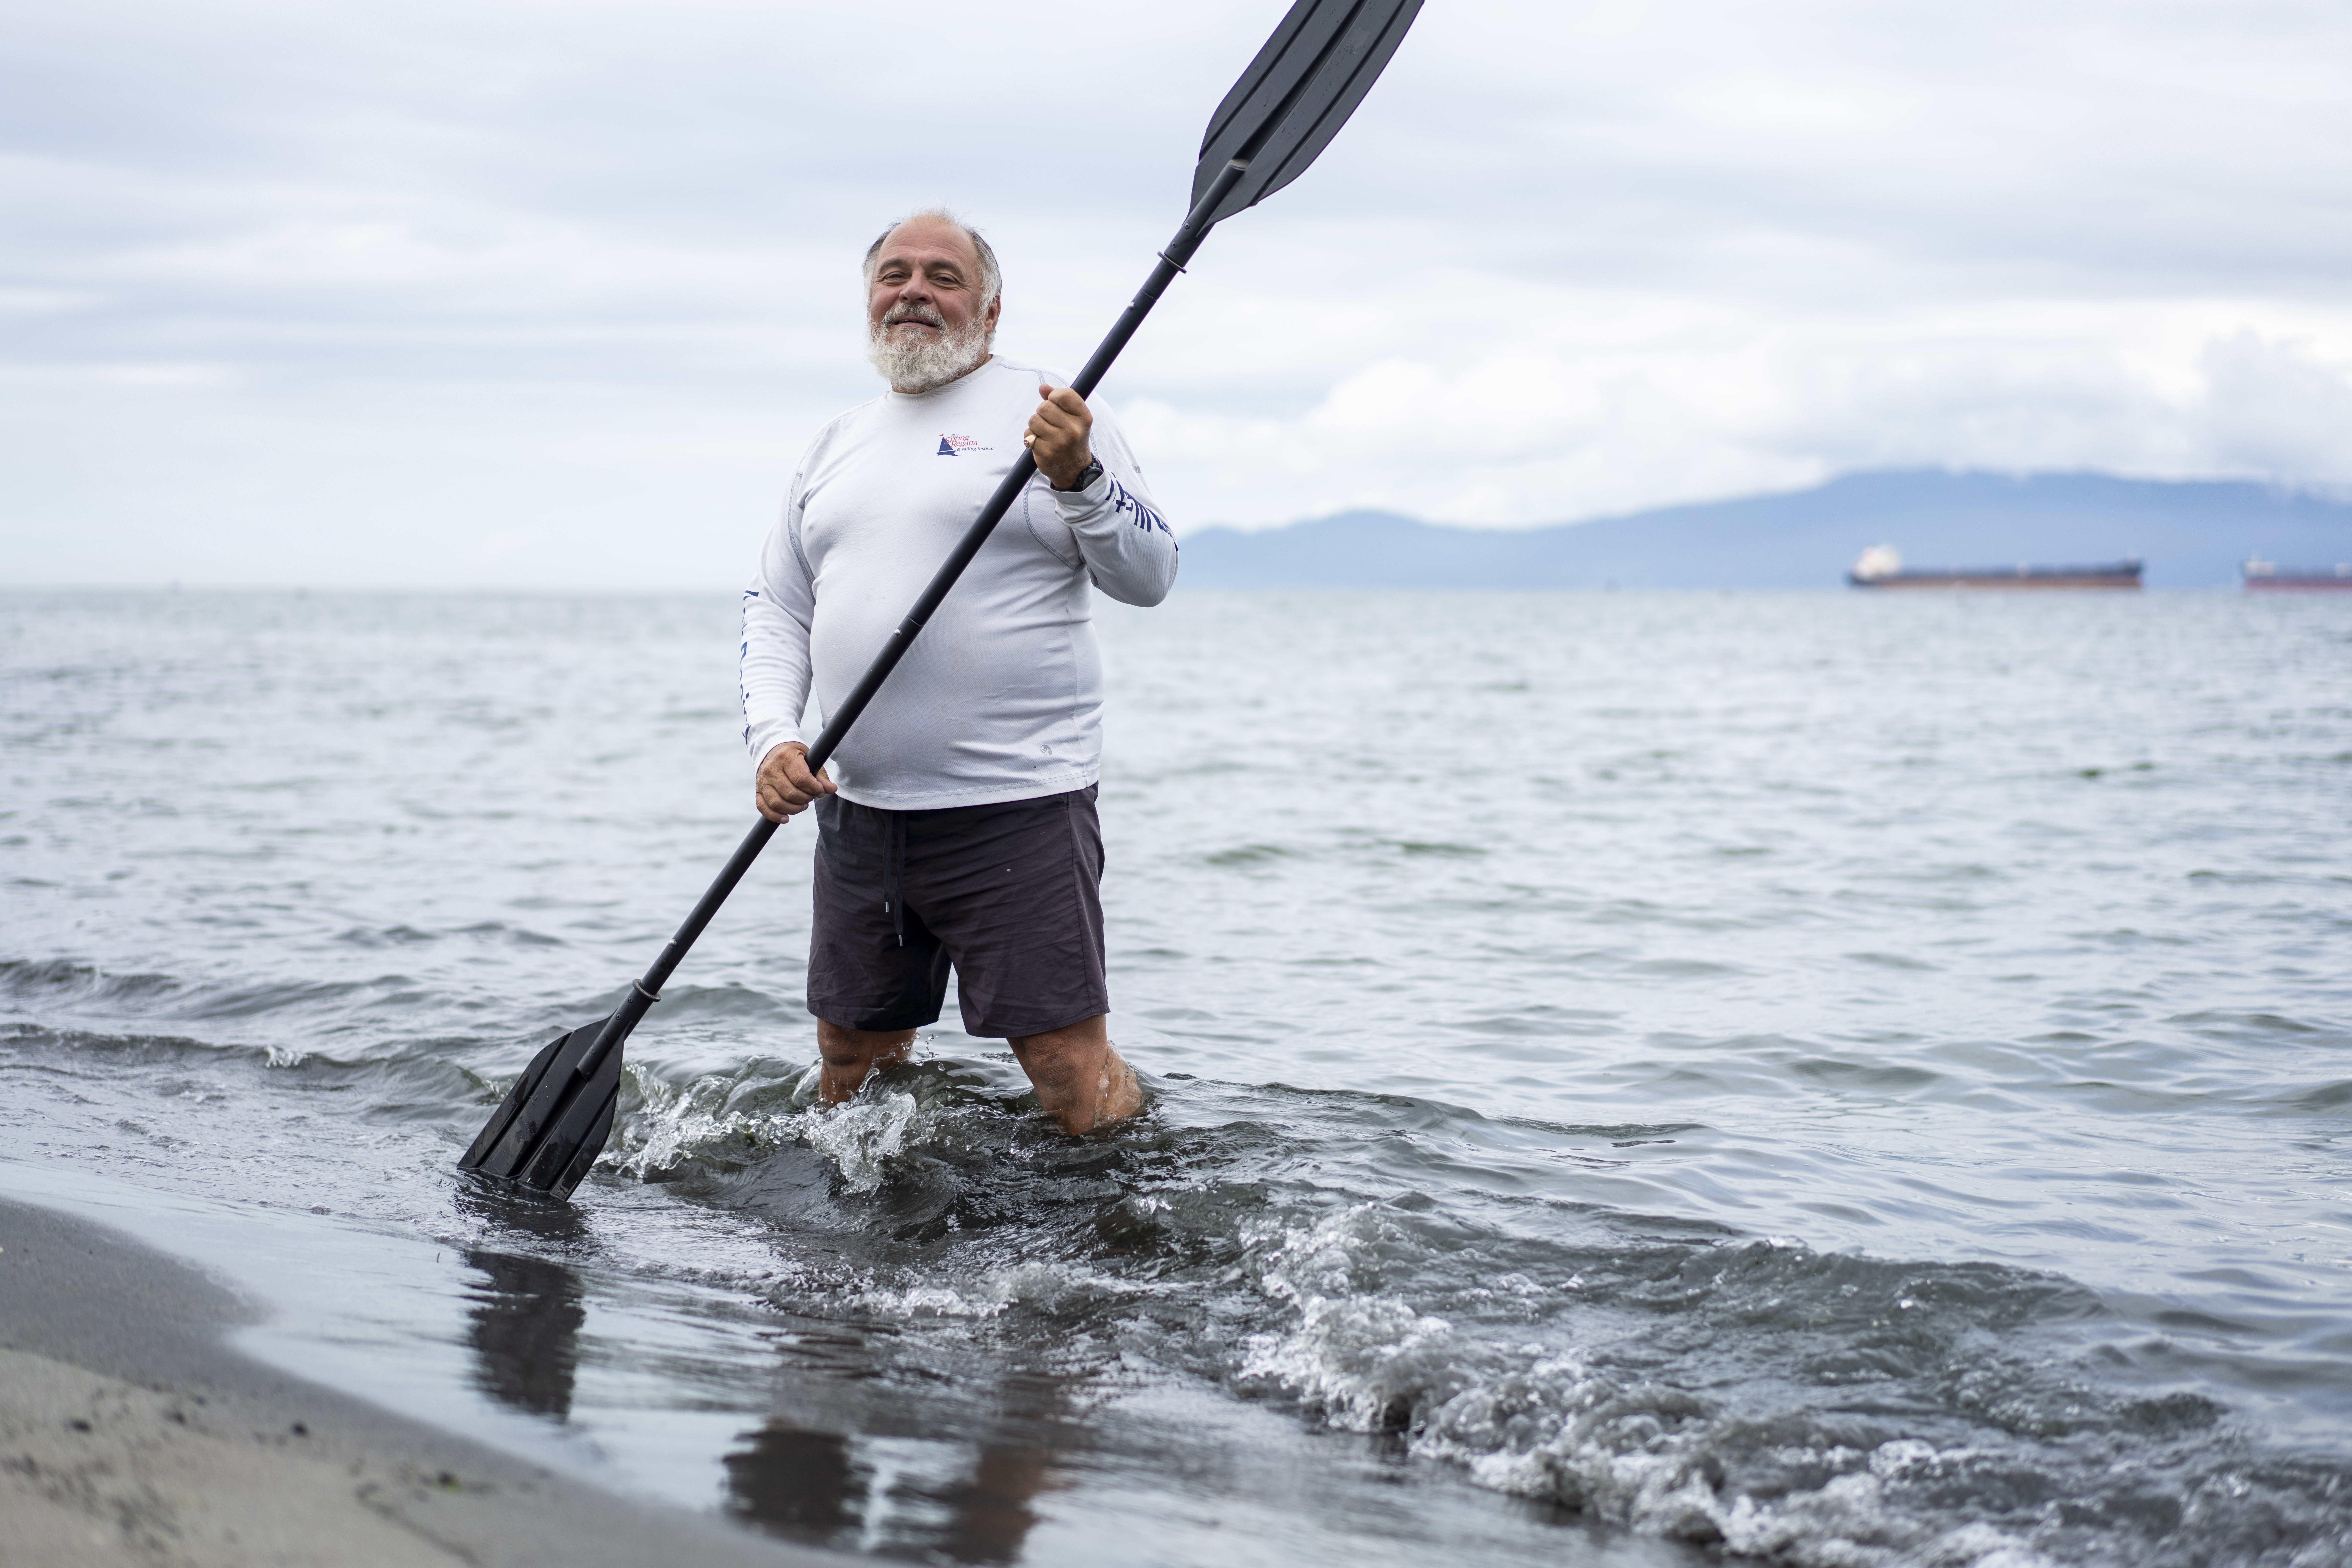 Paddling the Yukon River on a whim, an out-of-shape Irishman was